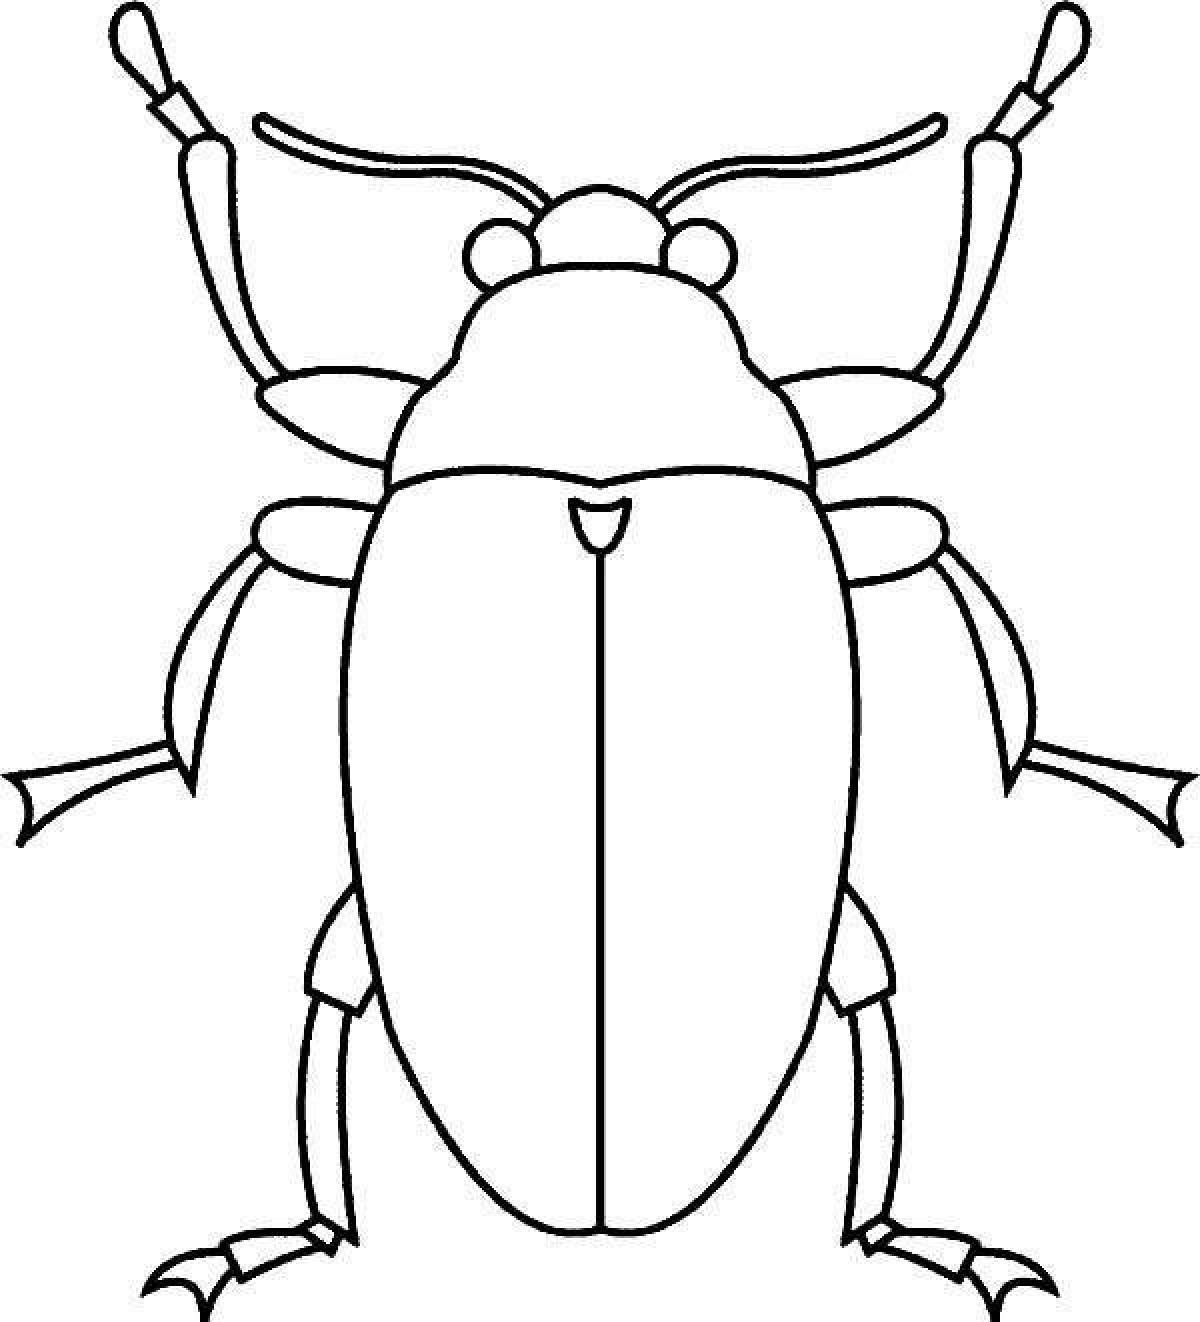 Delightful beetle coloring book for kids